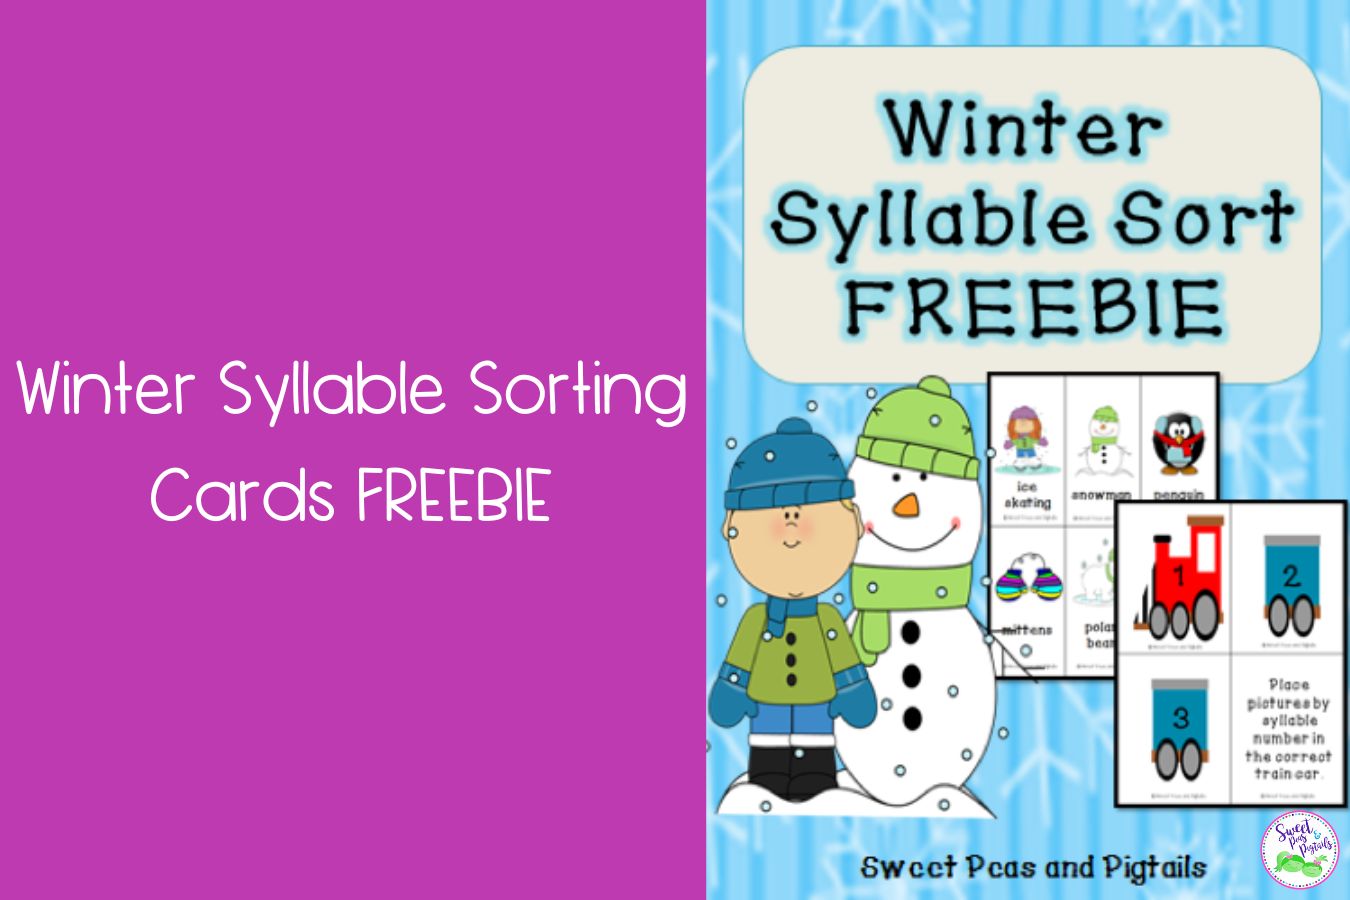 Winter Syllable Sorting Cards FREEBIE Featured